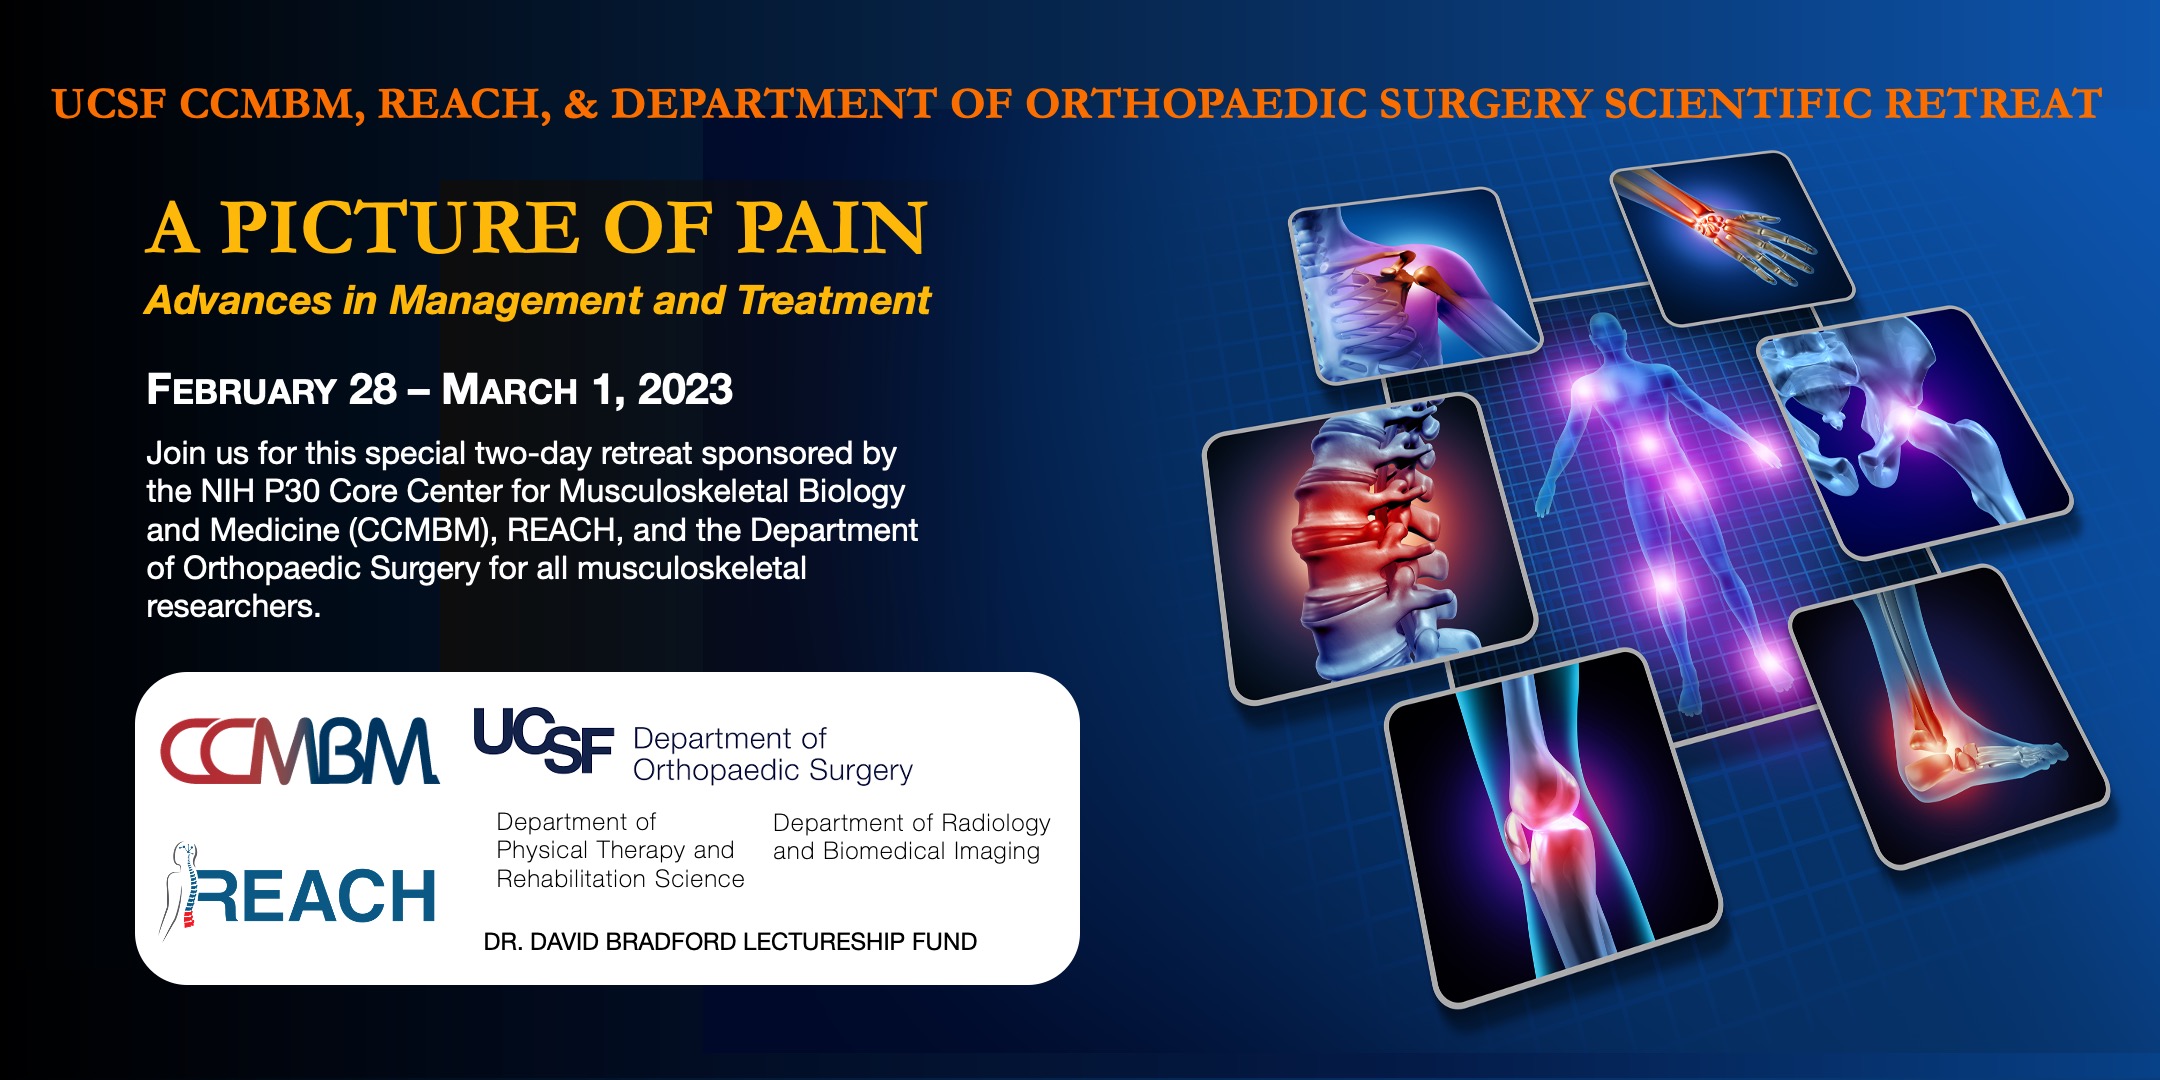 2023 UCSF CCMBM, REACH and Department of Orthopaedic Surgery Scientific Retreat invitation image